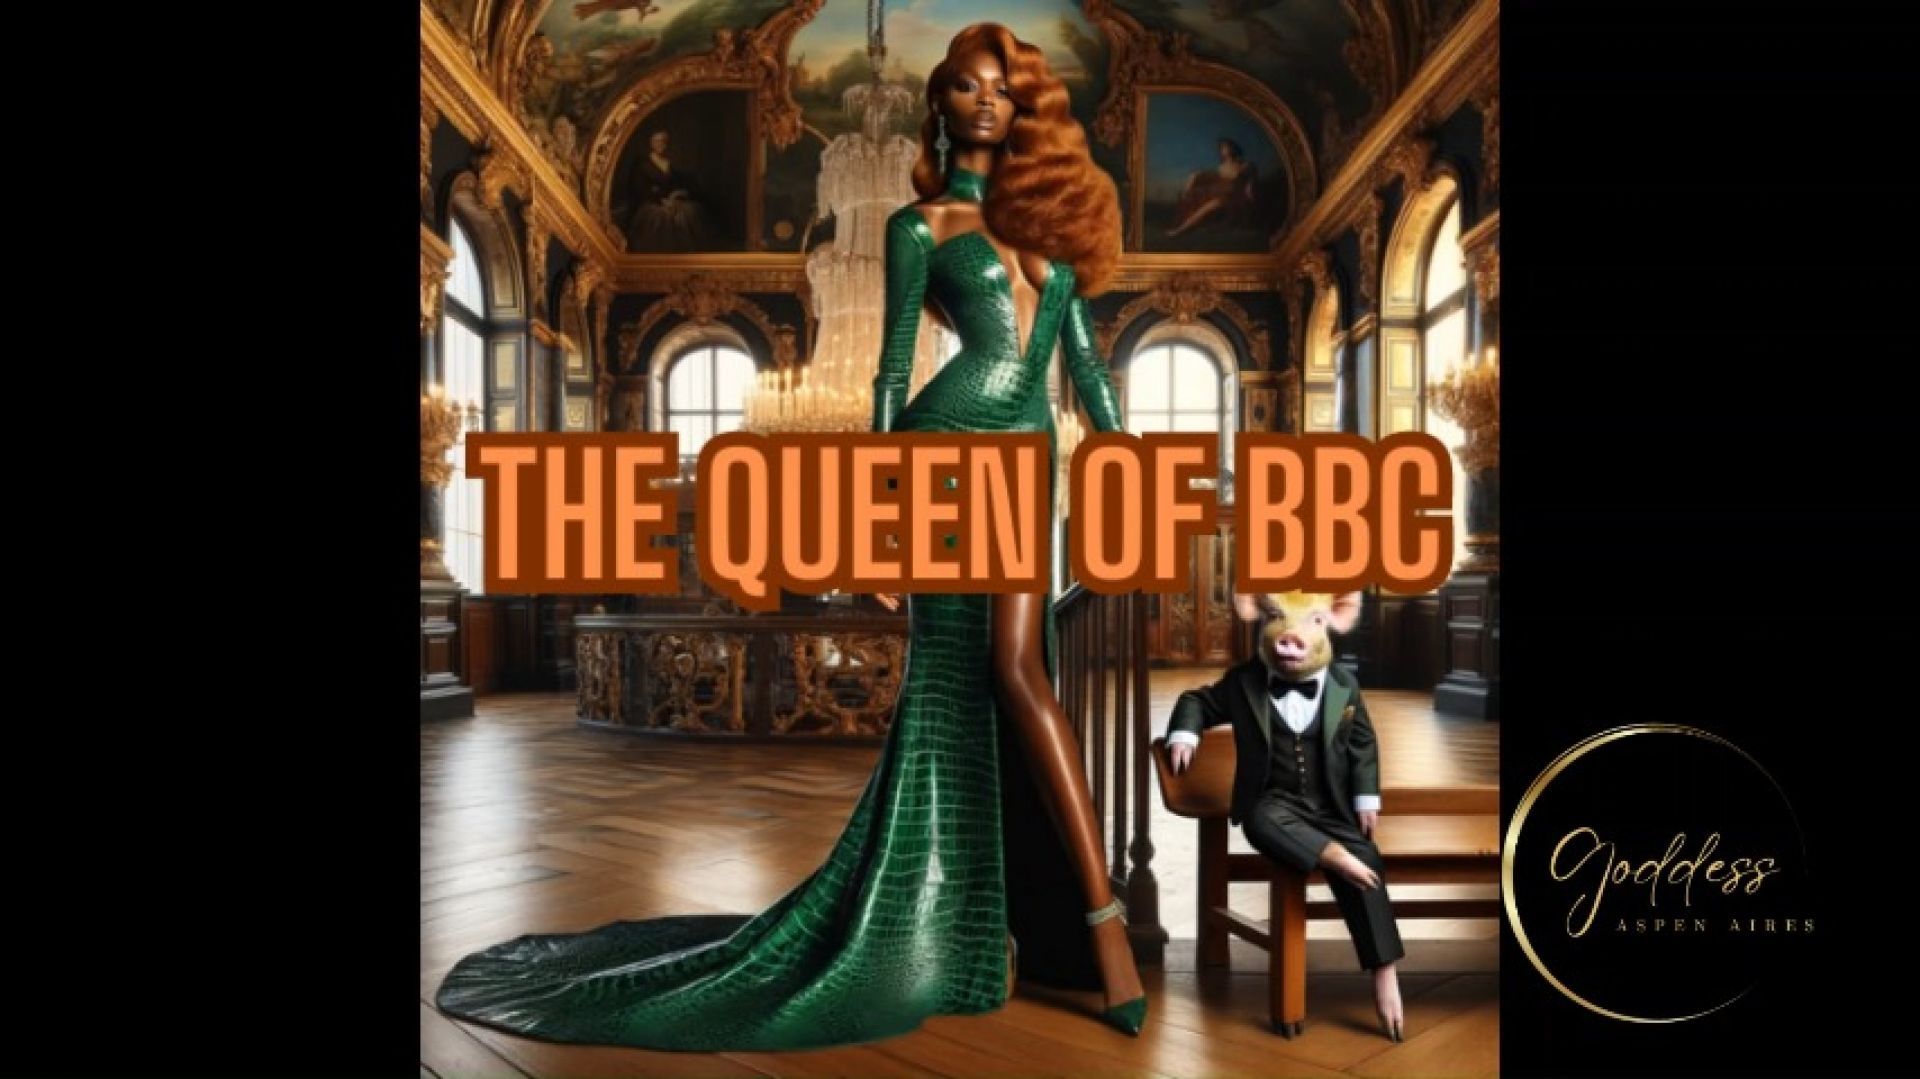 The Queen Of BBC